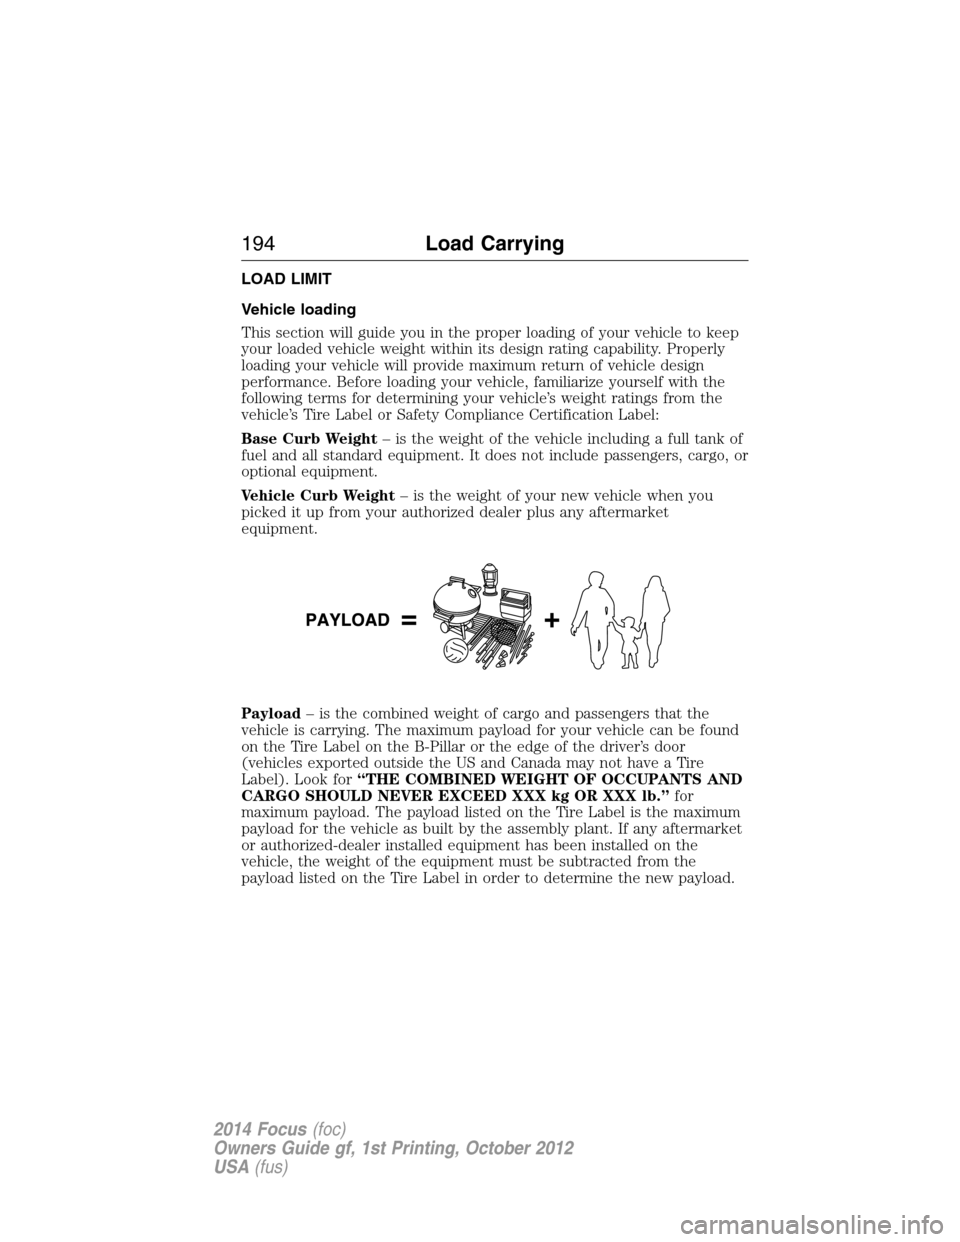 FORD FOCUS 2014 3.G User Guide LOAD LIMIT
Vehicle loading
This section will guide you in the proper loading of your vehicle to keep
your loaded vehicle weight within its design rating capability. Properly
loading your vehicle will 